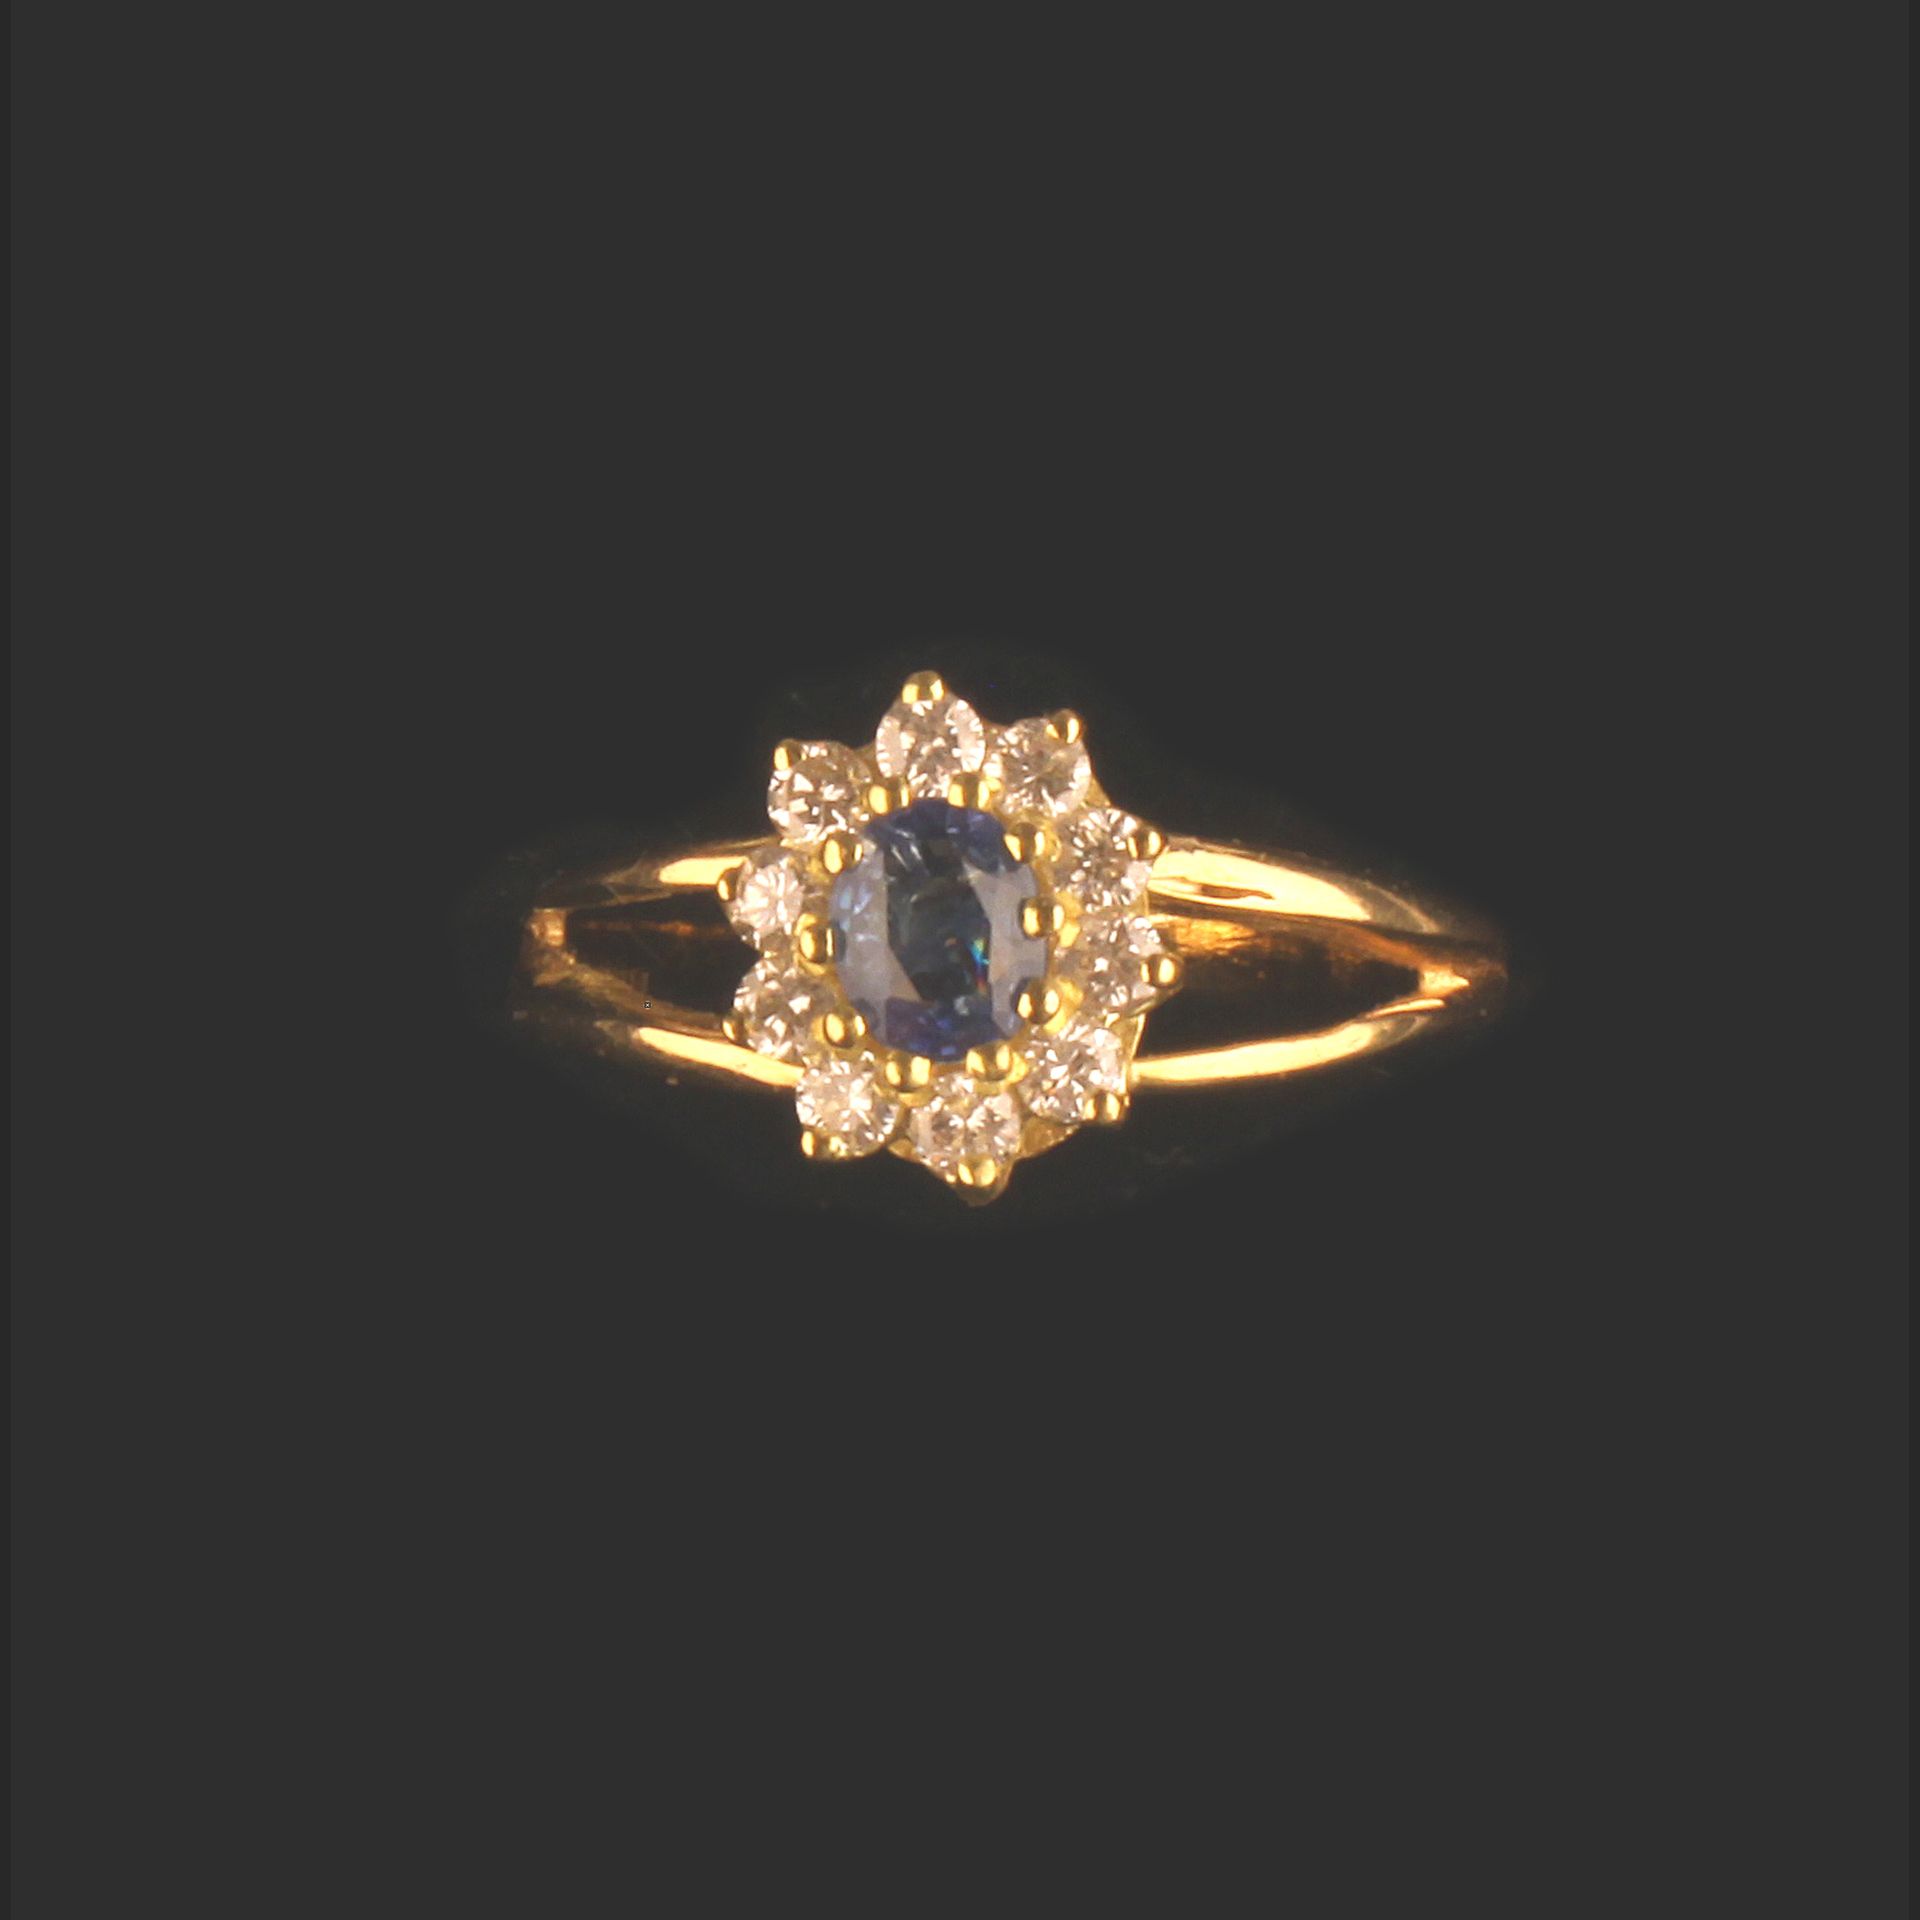 14ct GOLD RING SET WITH HIGH QUALITY SAPPHIRE SURROUNDED BY DIAMONDS - COLOUR F - VS CLARITY - Image 5 of 5